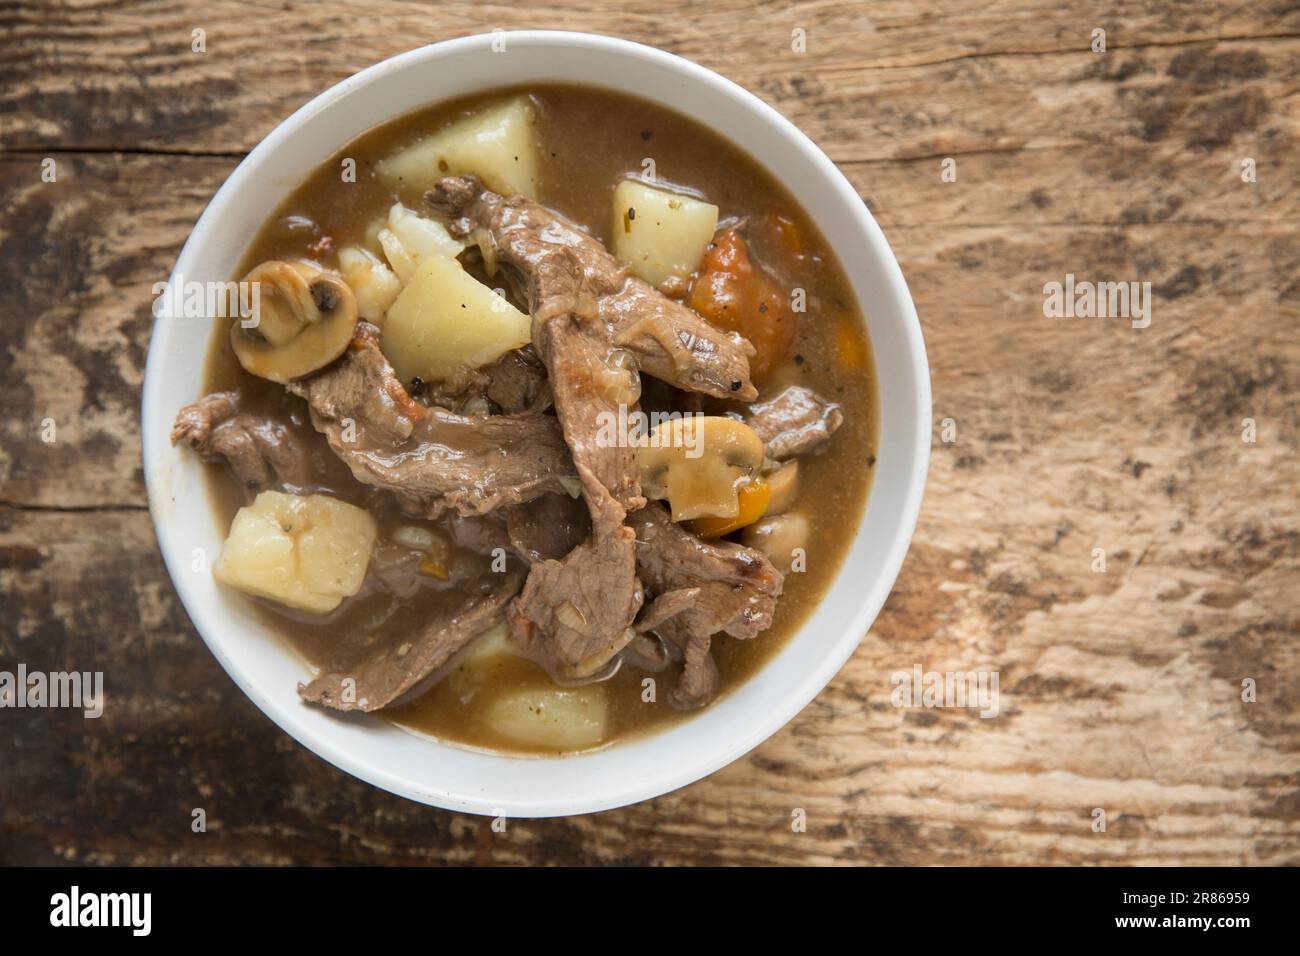 A homecooked stew made from venison from a roe deer, Capreolus capreolus, which includes onions, carrots and potatoes. England UK GB Stock Photo